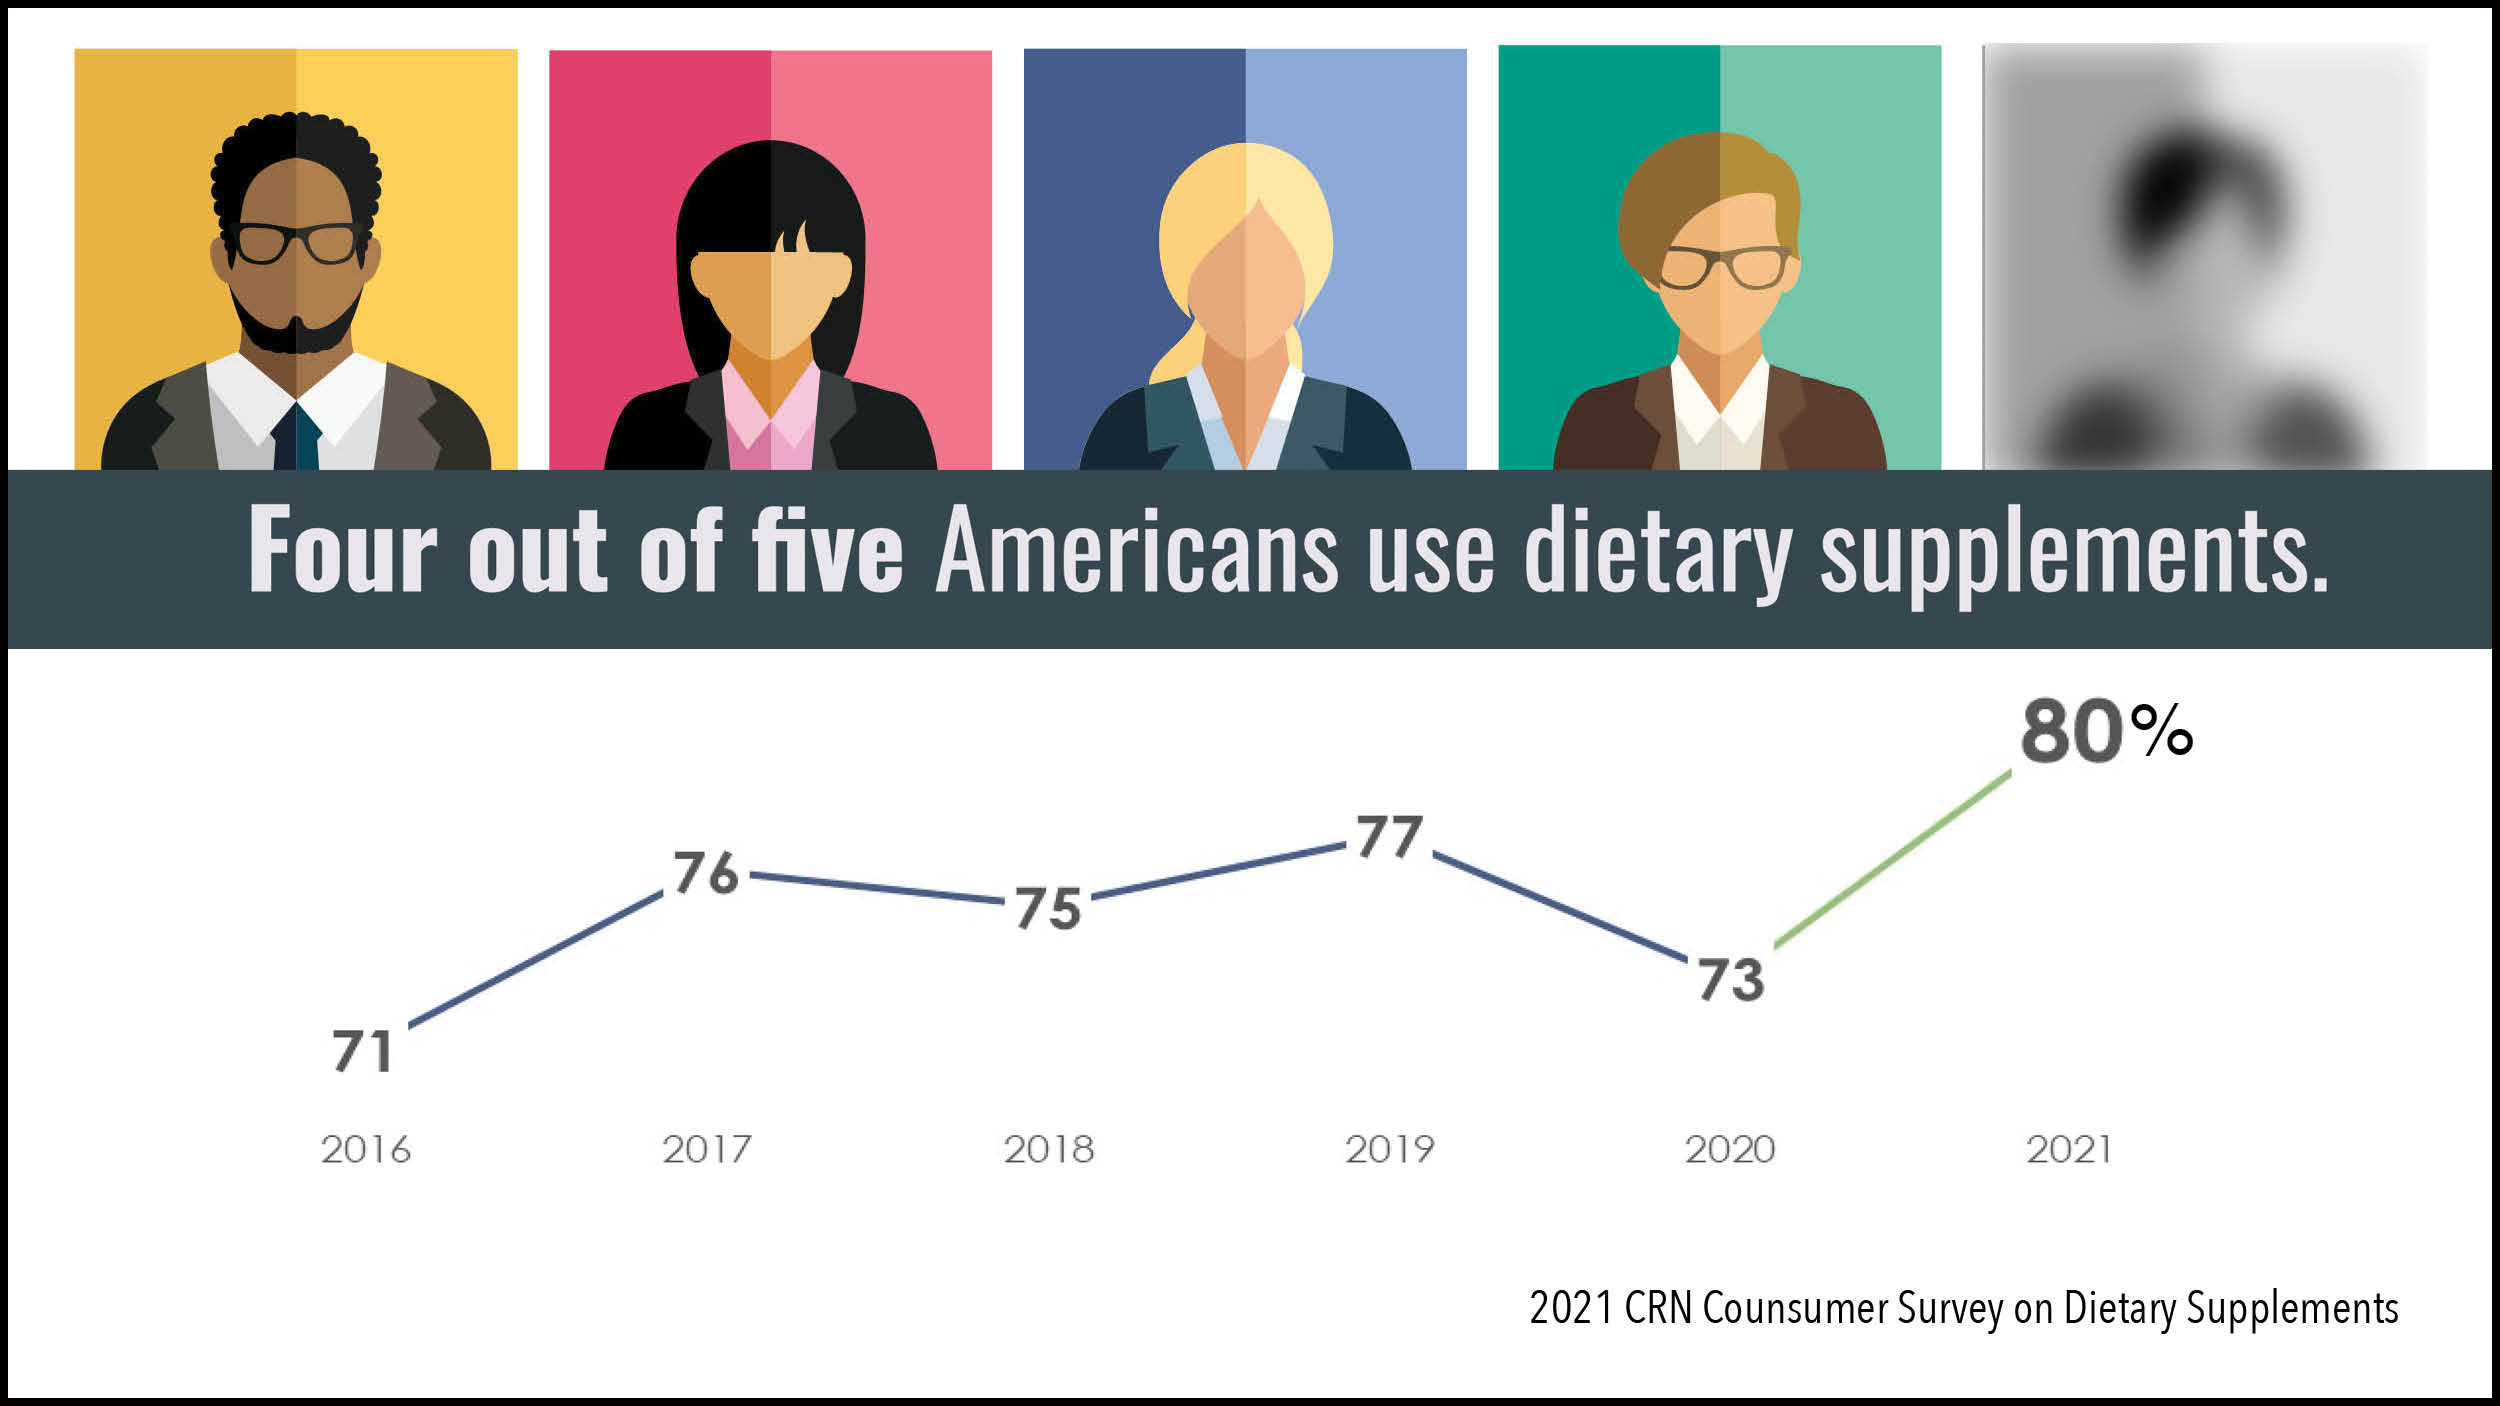 Four out of five Americans use supplements